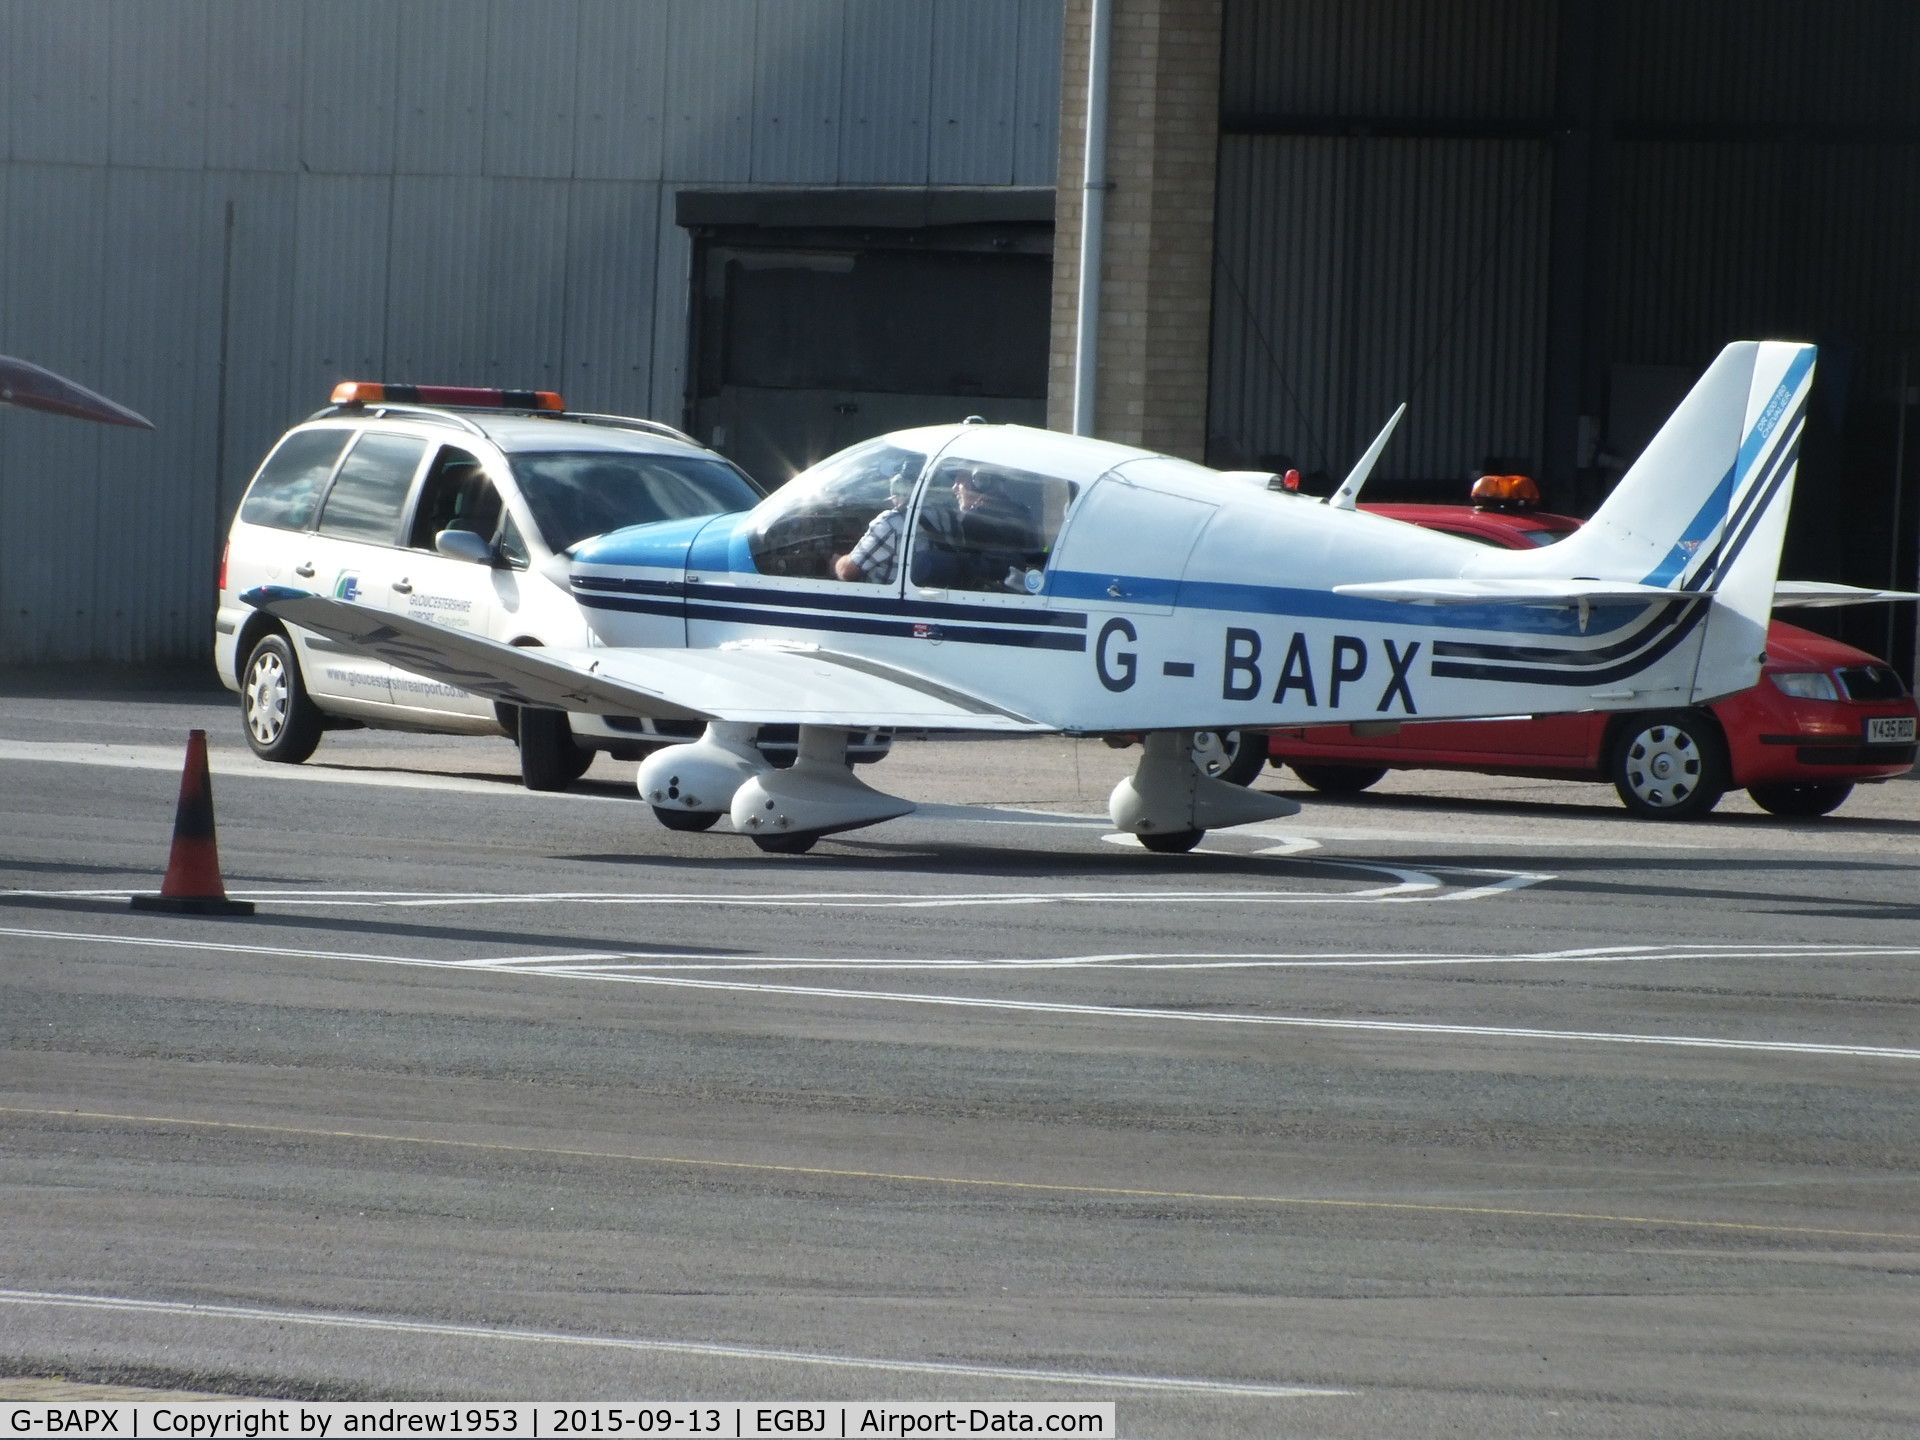 G-BAPX, 1972 Robin DR-400-160 Chevalier C/N 789, G-BAPX at Gloucestershire Airport.